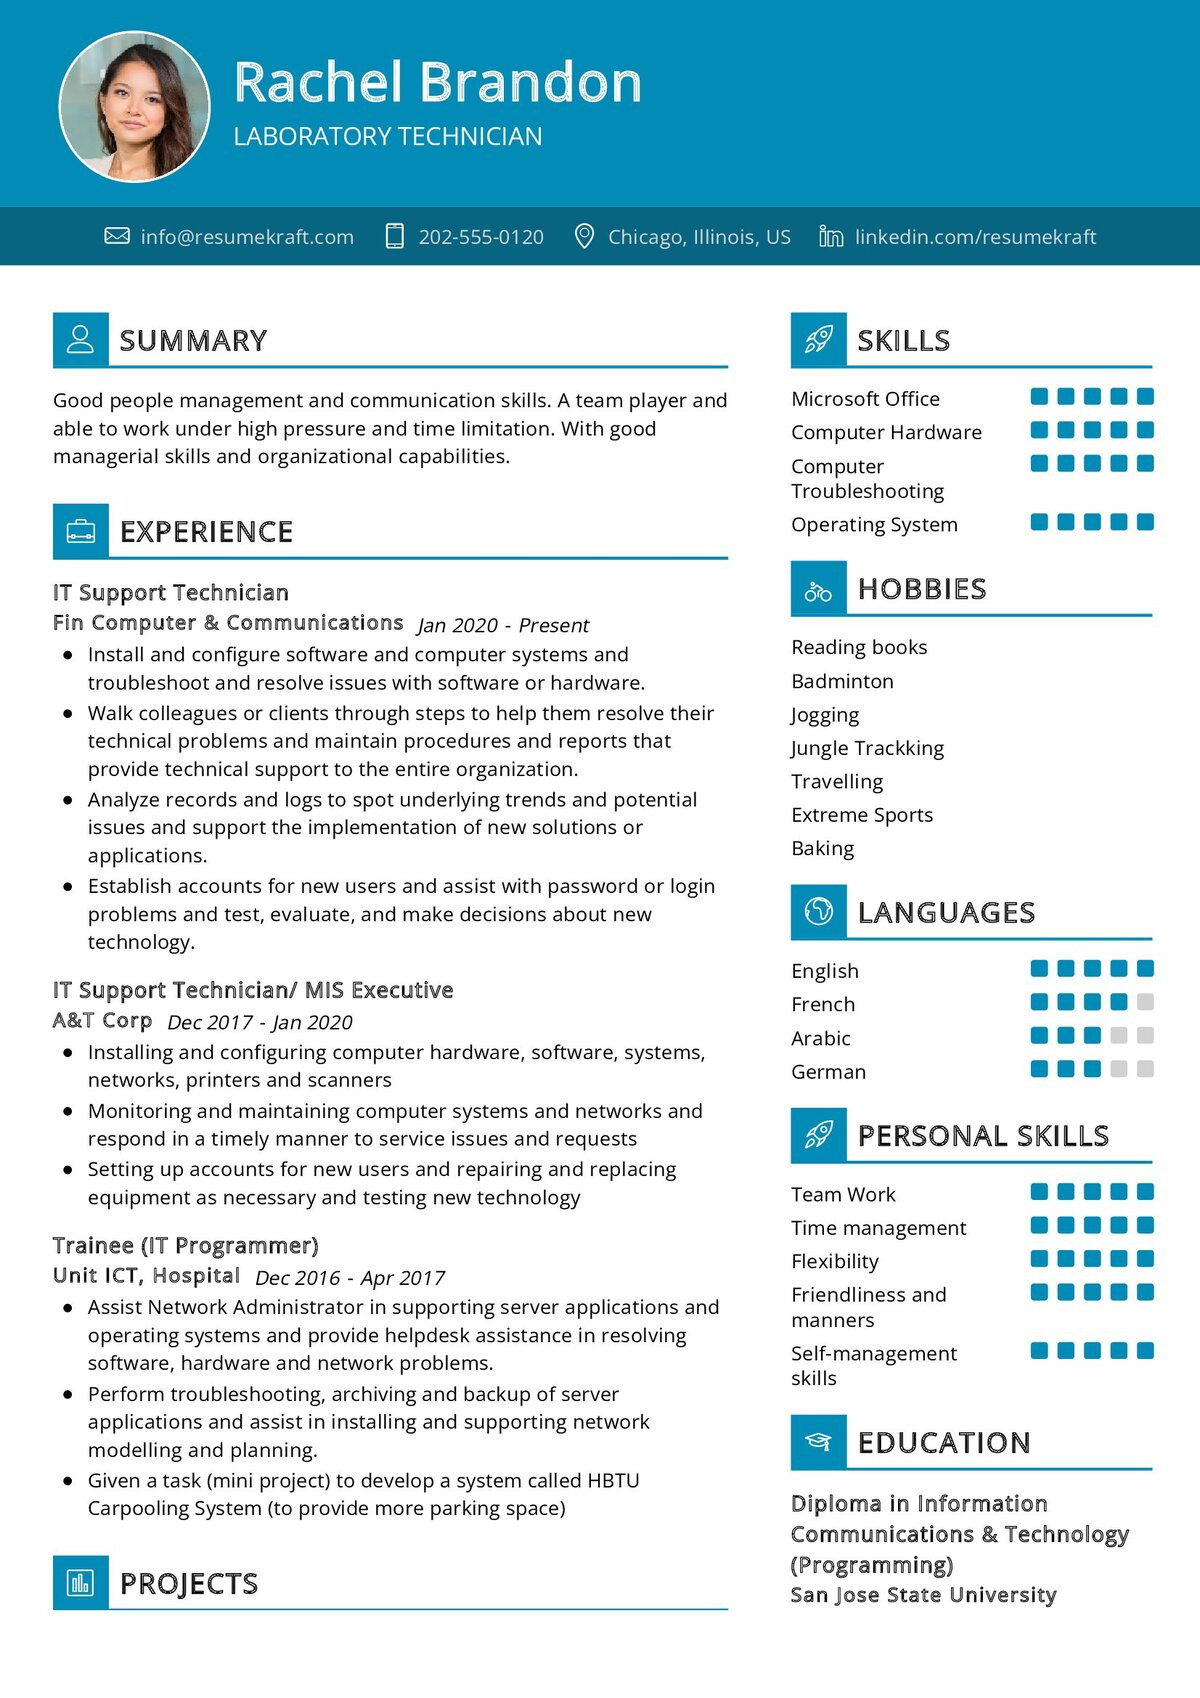 Sample Resume From A Lab Technician Laboratory Technician Resume Sample 2022 Writing Tips – Resumekraft